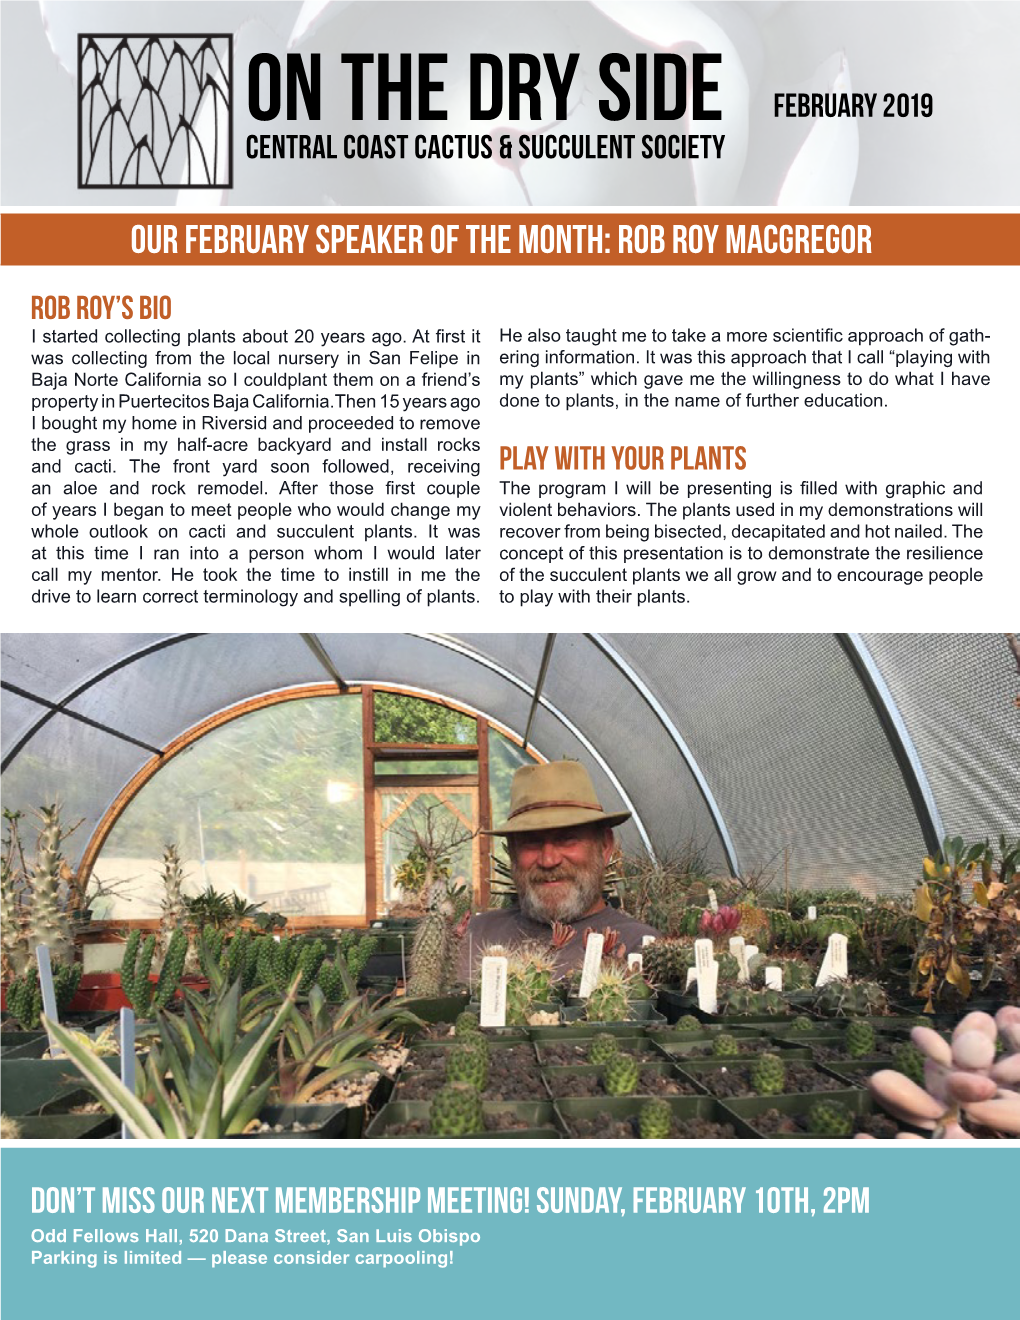 On the Dry Side February 2019 Central Coast Cactus & Succulent Society